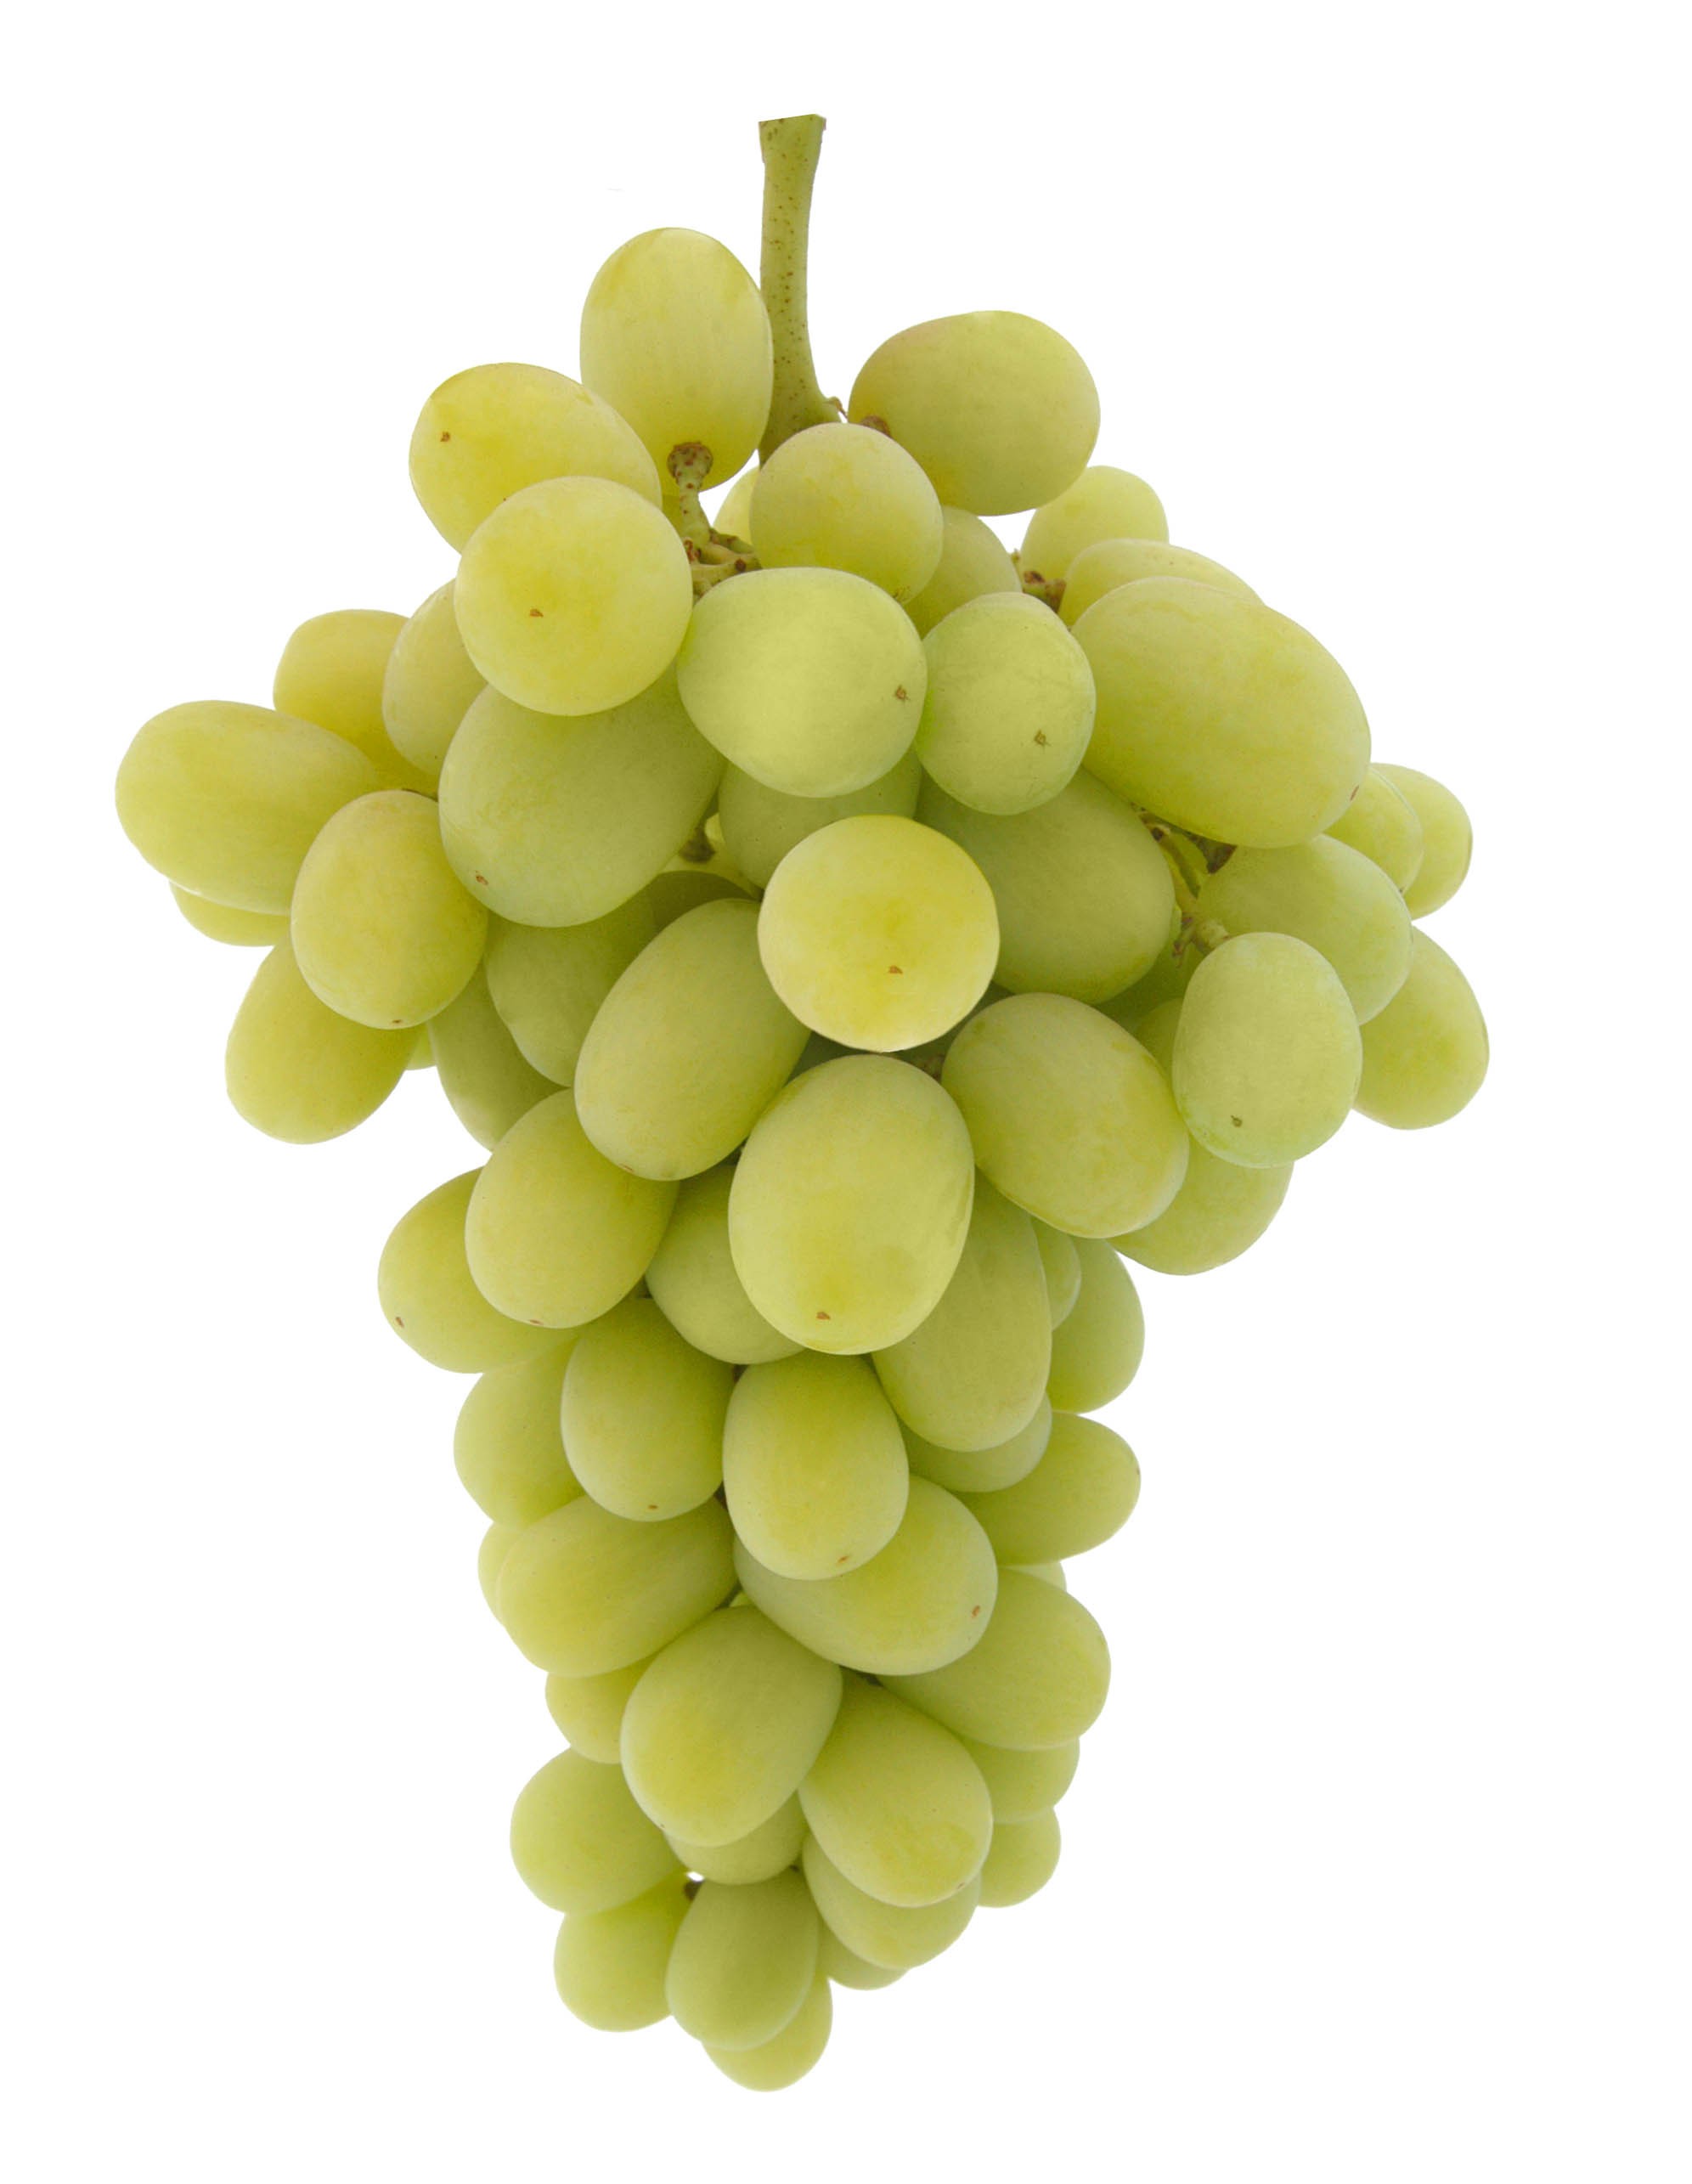 Buy Grapes - Green Seedless Online From HDS Foods